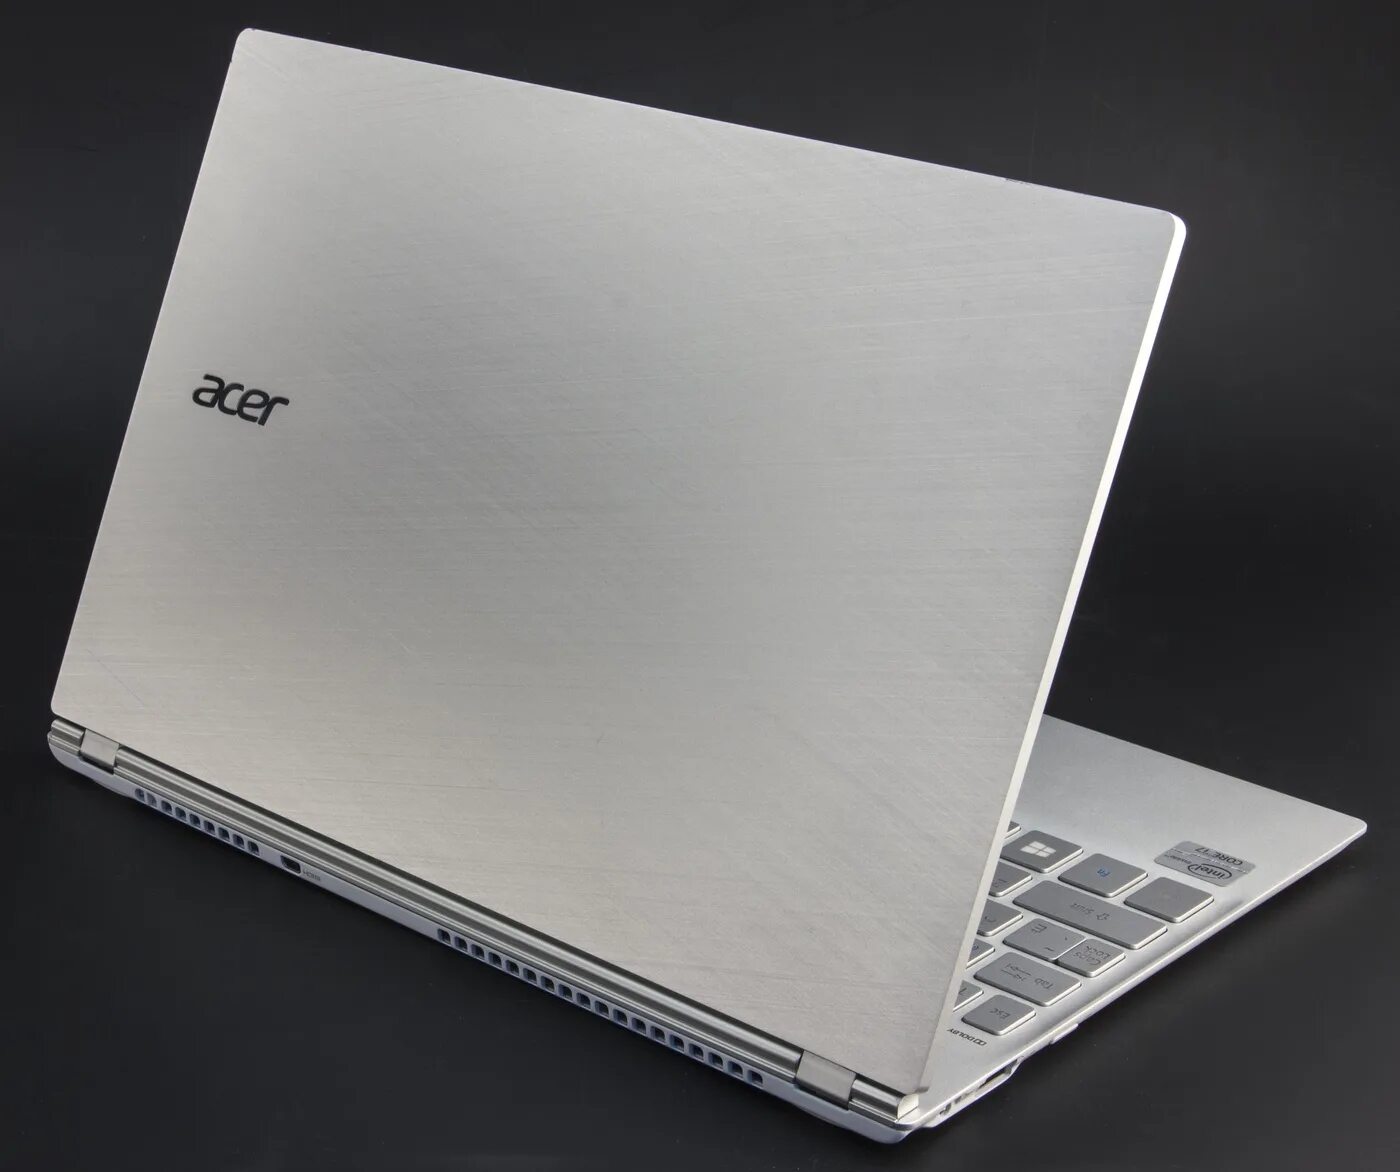 Acer Aspire s7. Acer Aspire s7 ms2364. Acer Aspire s7 15.6. Acer Aspire s7 ms2364 Assembly.